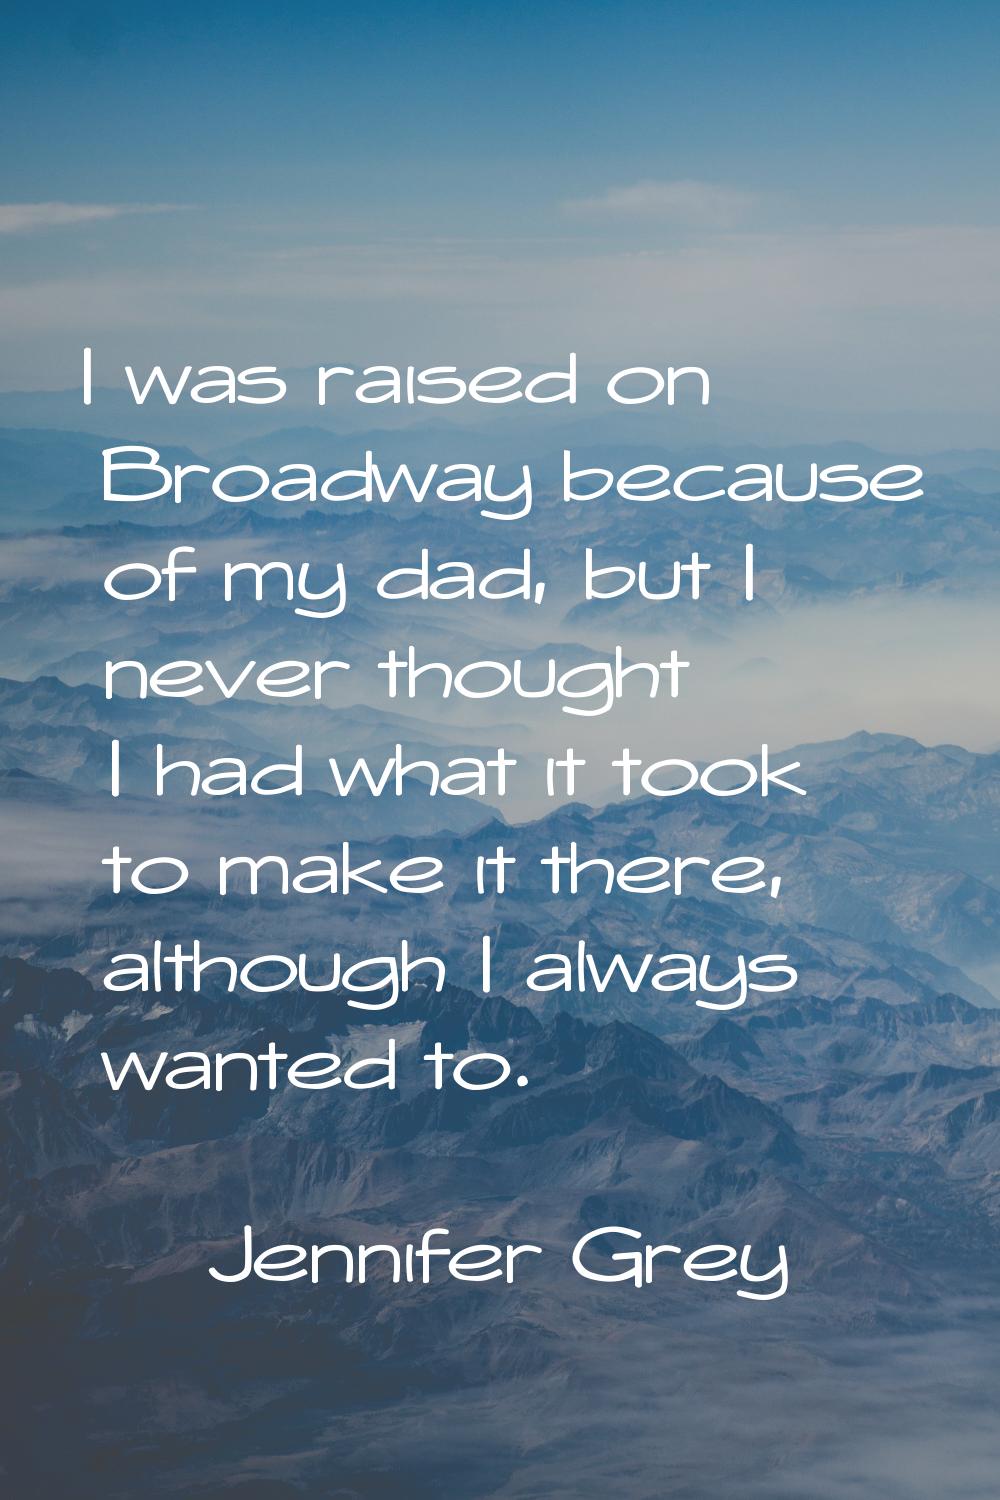 I was raised on Broadway because of my dad, but I never thought I had what it took to make it there